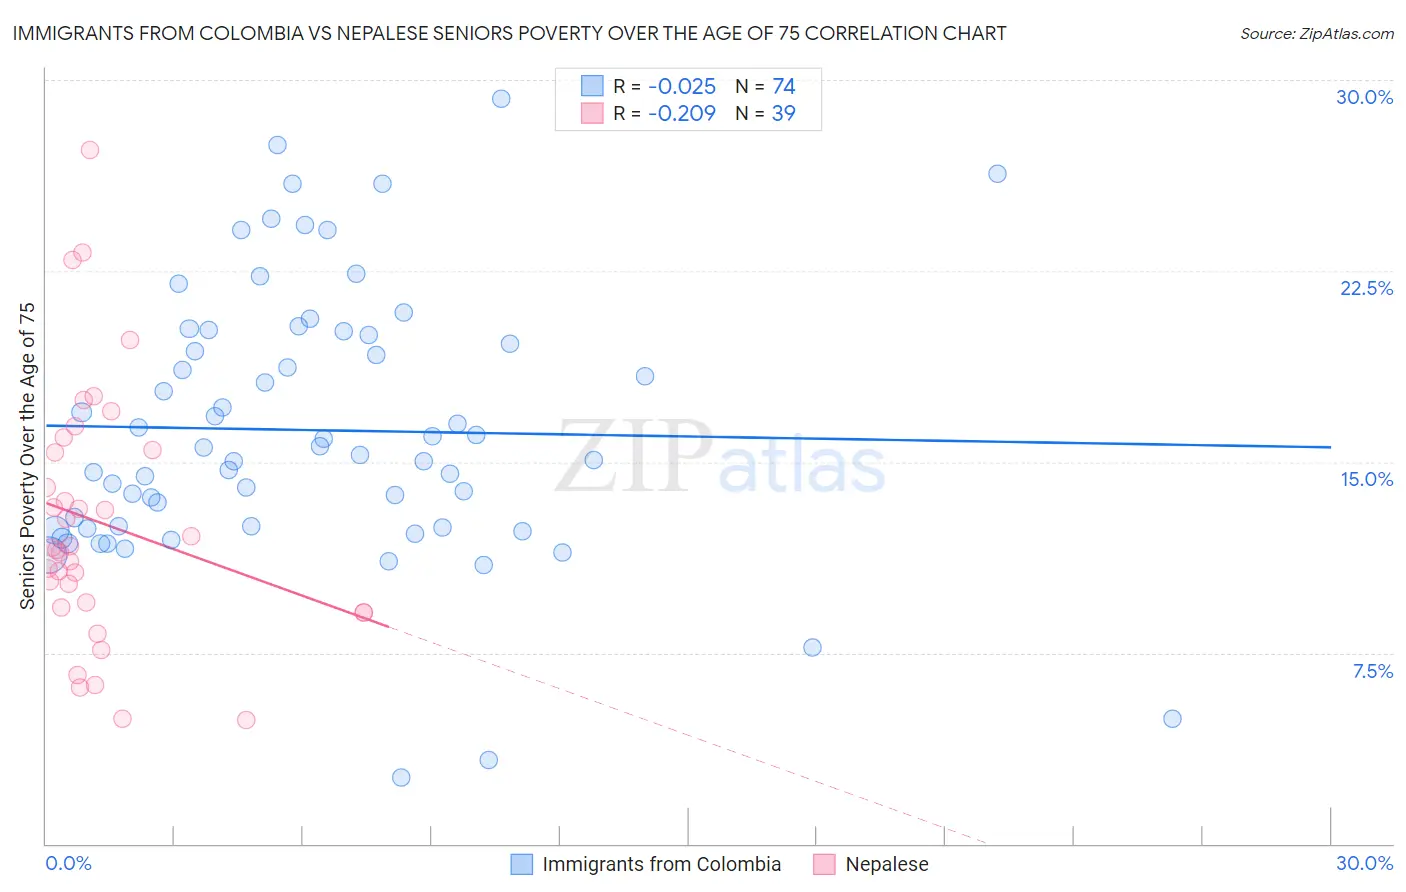 Immigrants from Colombia vs Nepalese Seniors Poverty Over the Age of 75